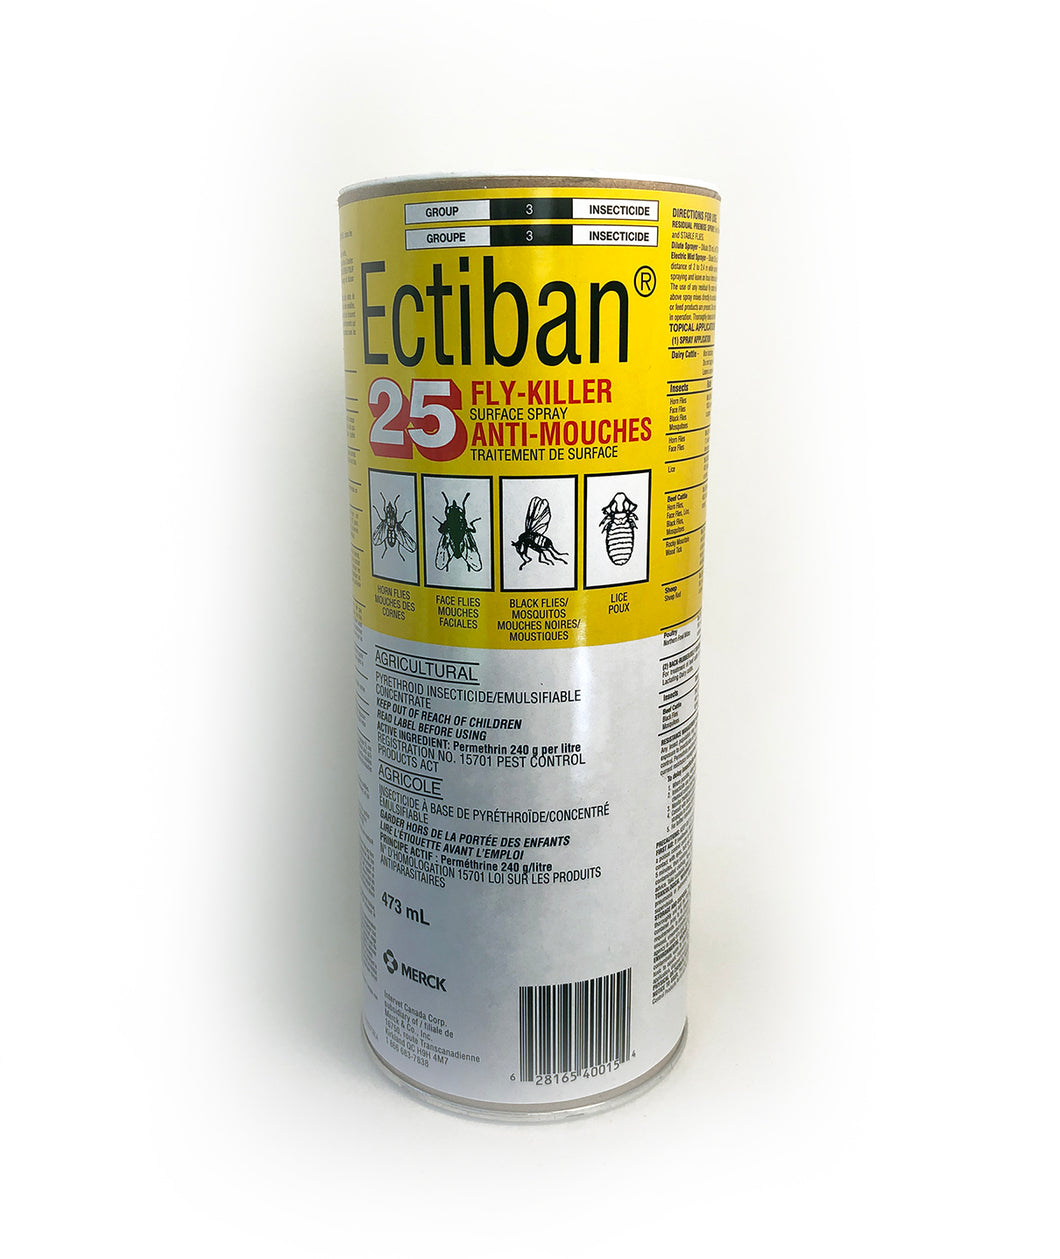 ECTIBAN 25 FLY-KILLER 473 ml INSECTICIDE